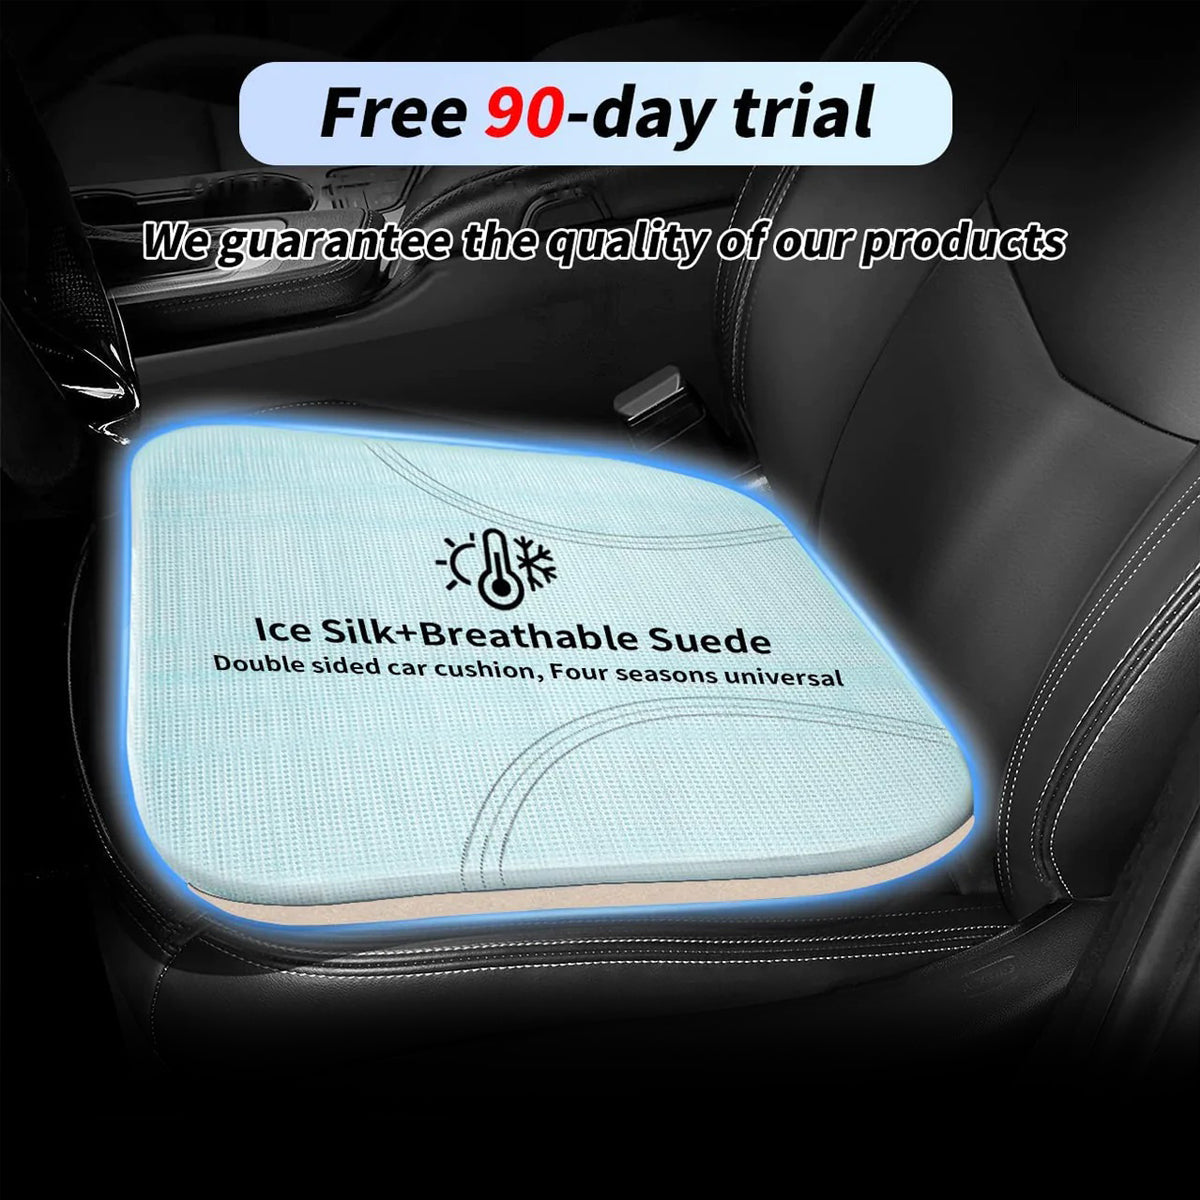 Delicate Leather Car Seat Cushion, Custom For Cars, Car Memory Foam Seat Cushion, Heightening Seat Cushion, Seat Cushion for Car and Office Chair WQ19999 - Delicate Leather